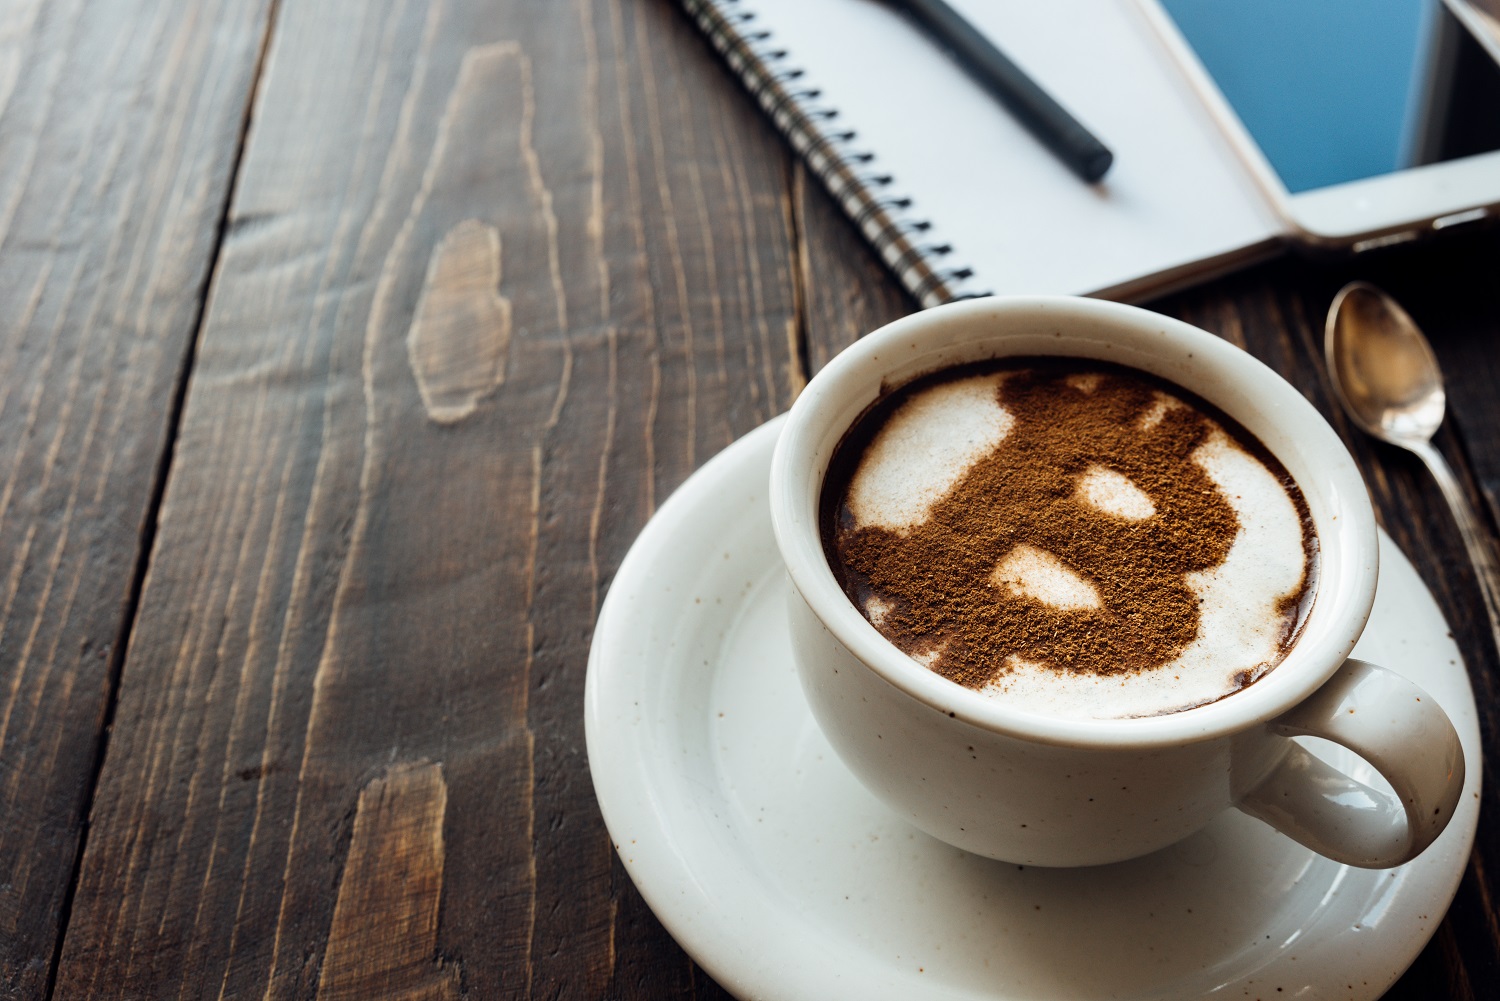 A cup of coffee on a wooden table next to a notepad and a mobile phone, decorated with cinnamon powder made to resemble the Bitcoin logo.